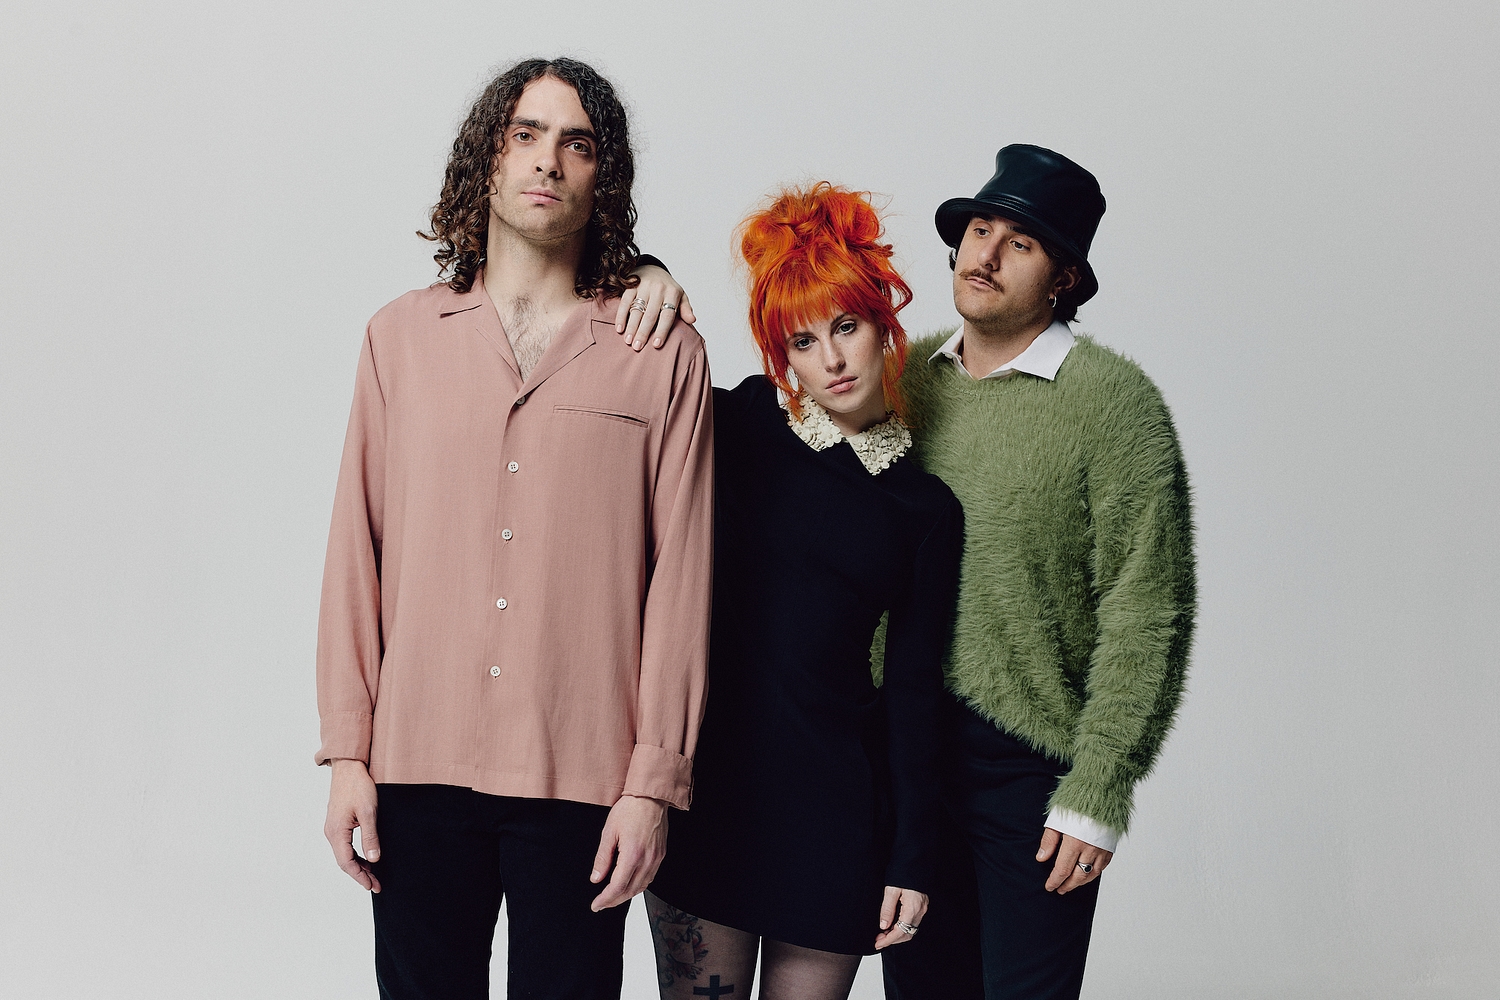 Paramore announce they are “freshly independent” artists